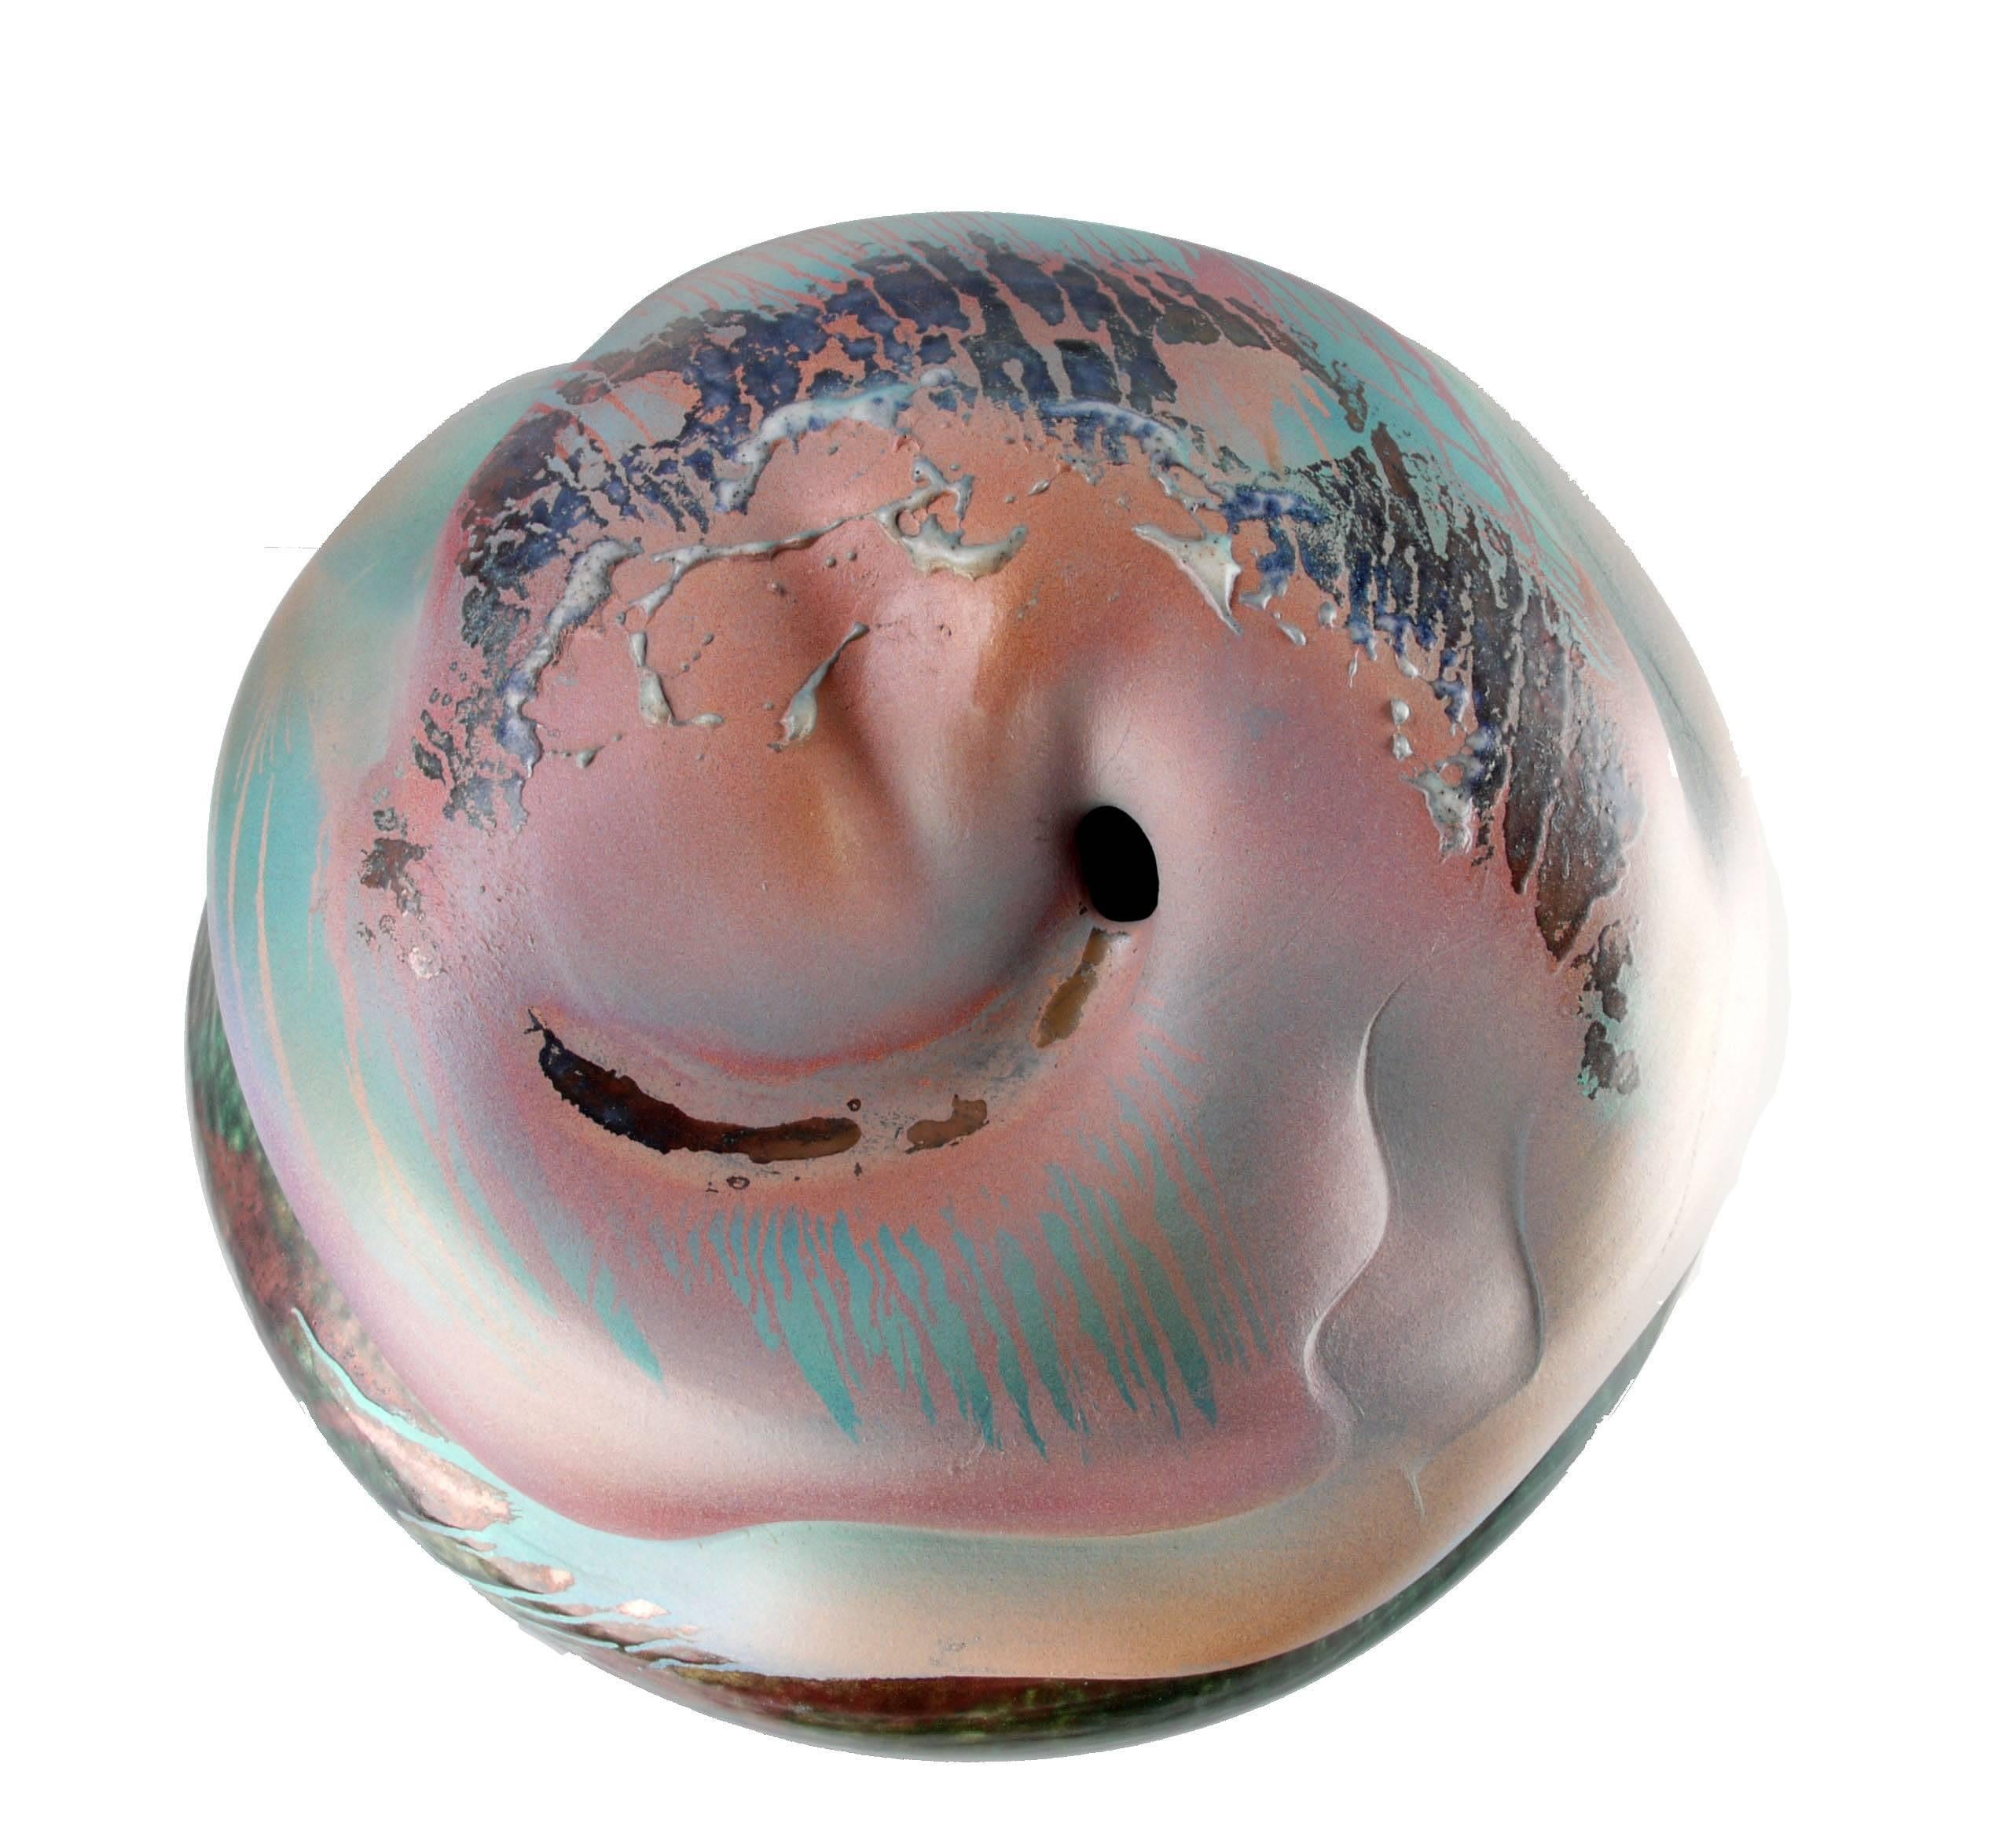 American Mid-Century Modern Large Spherical Drip Glazed Art Pottery in Green, White, Pink